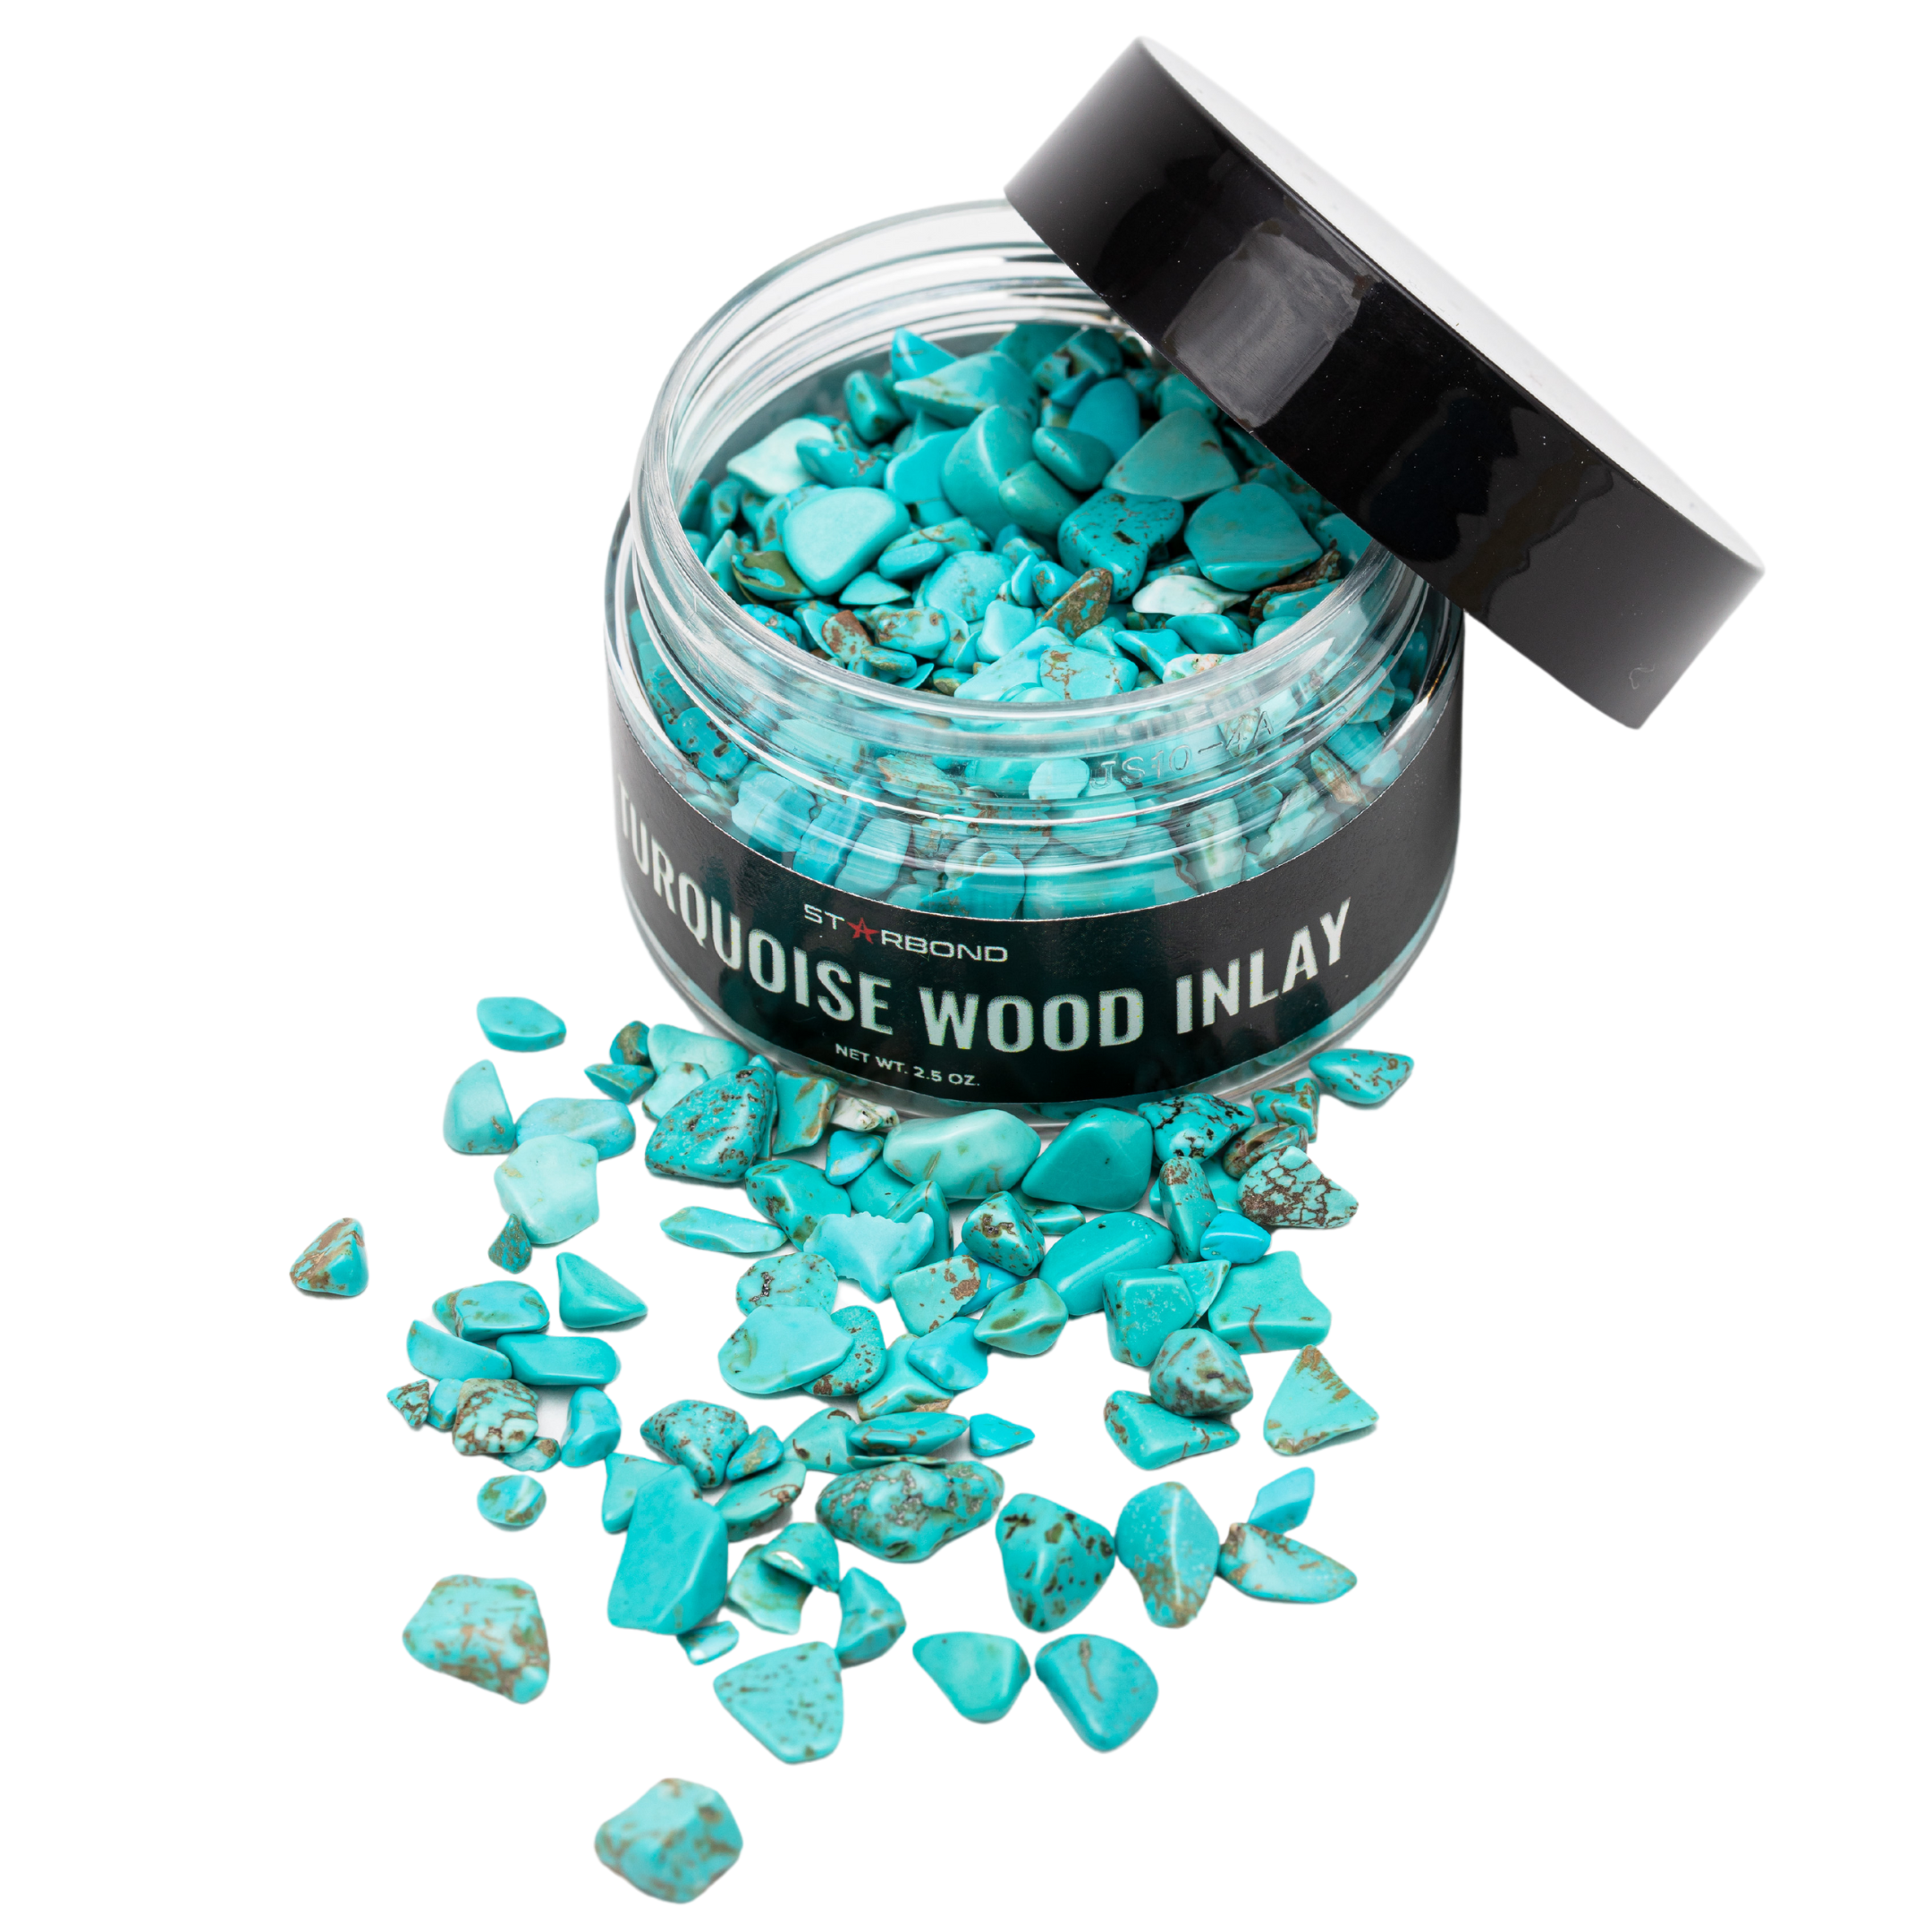 Turquoise Wood Inlay Chips, 2.5 oz.